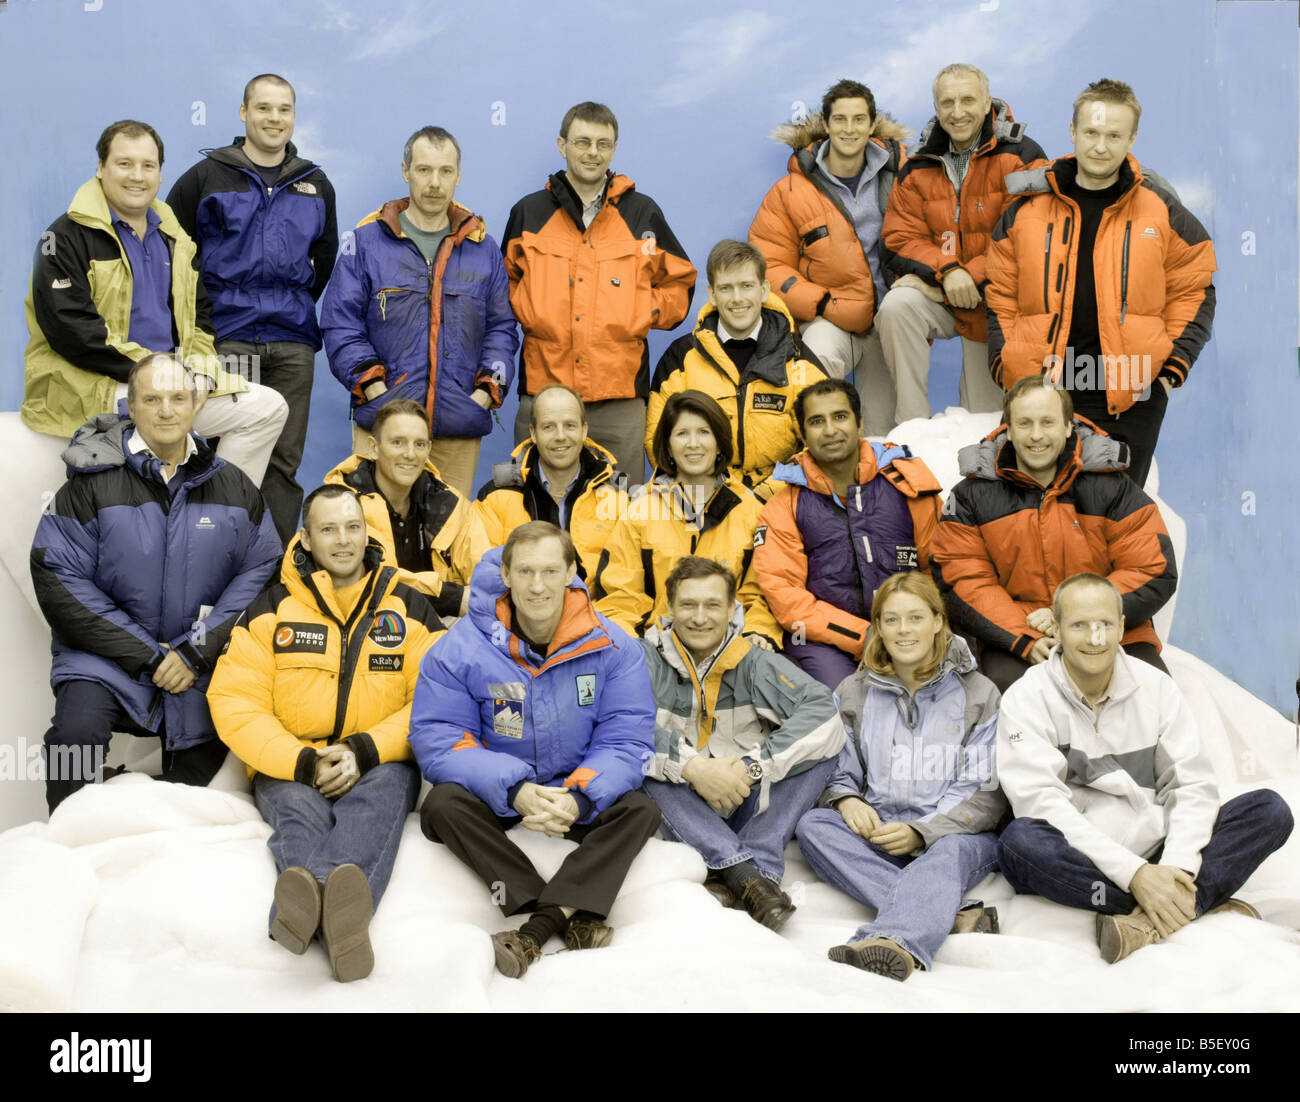 Everest 50th anniversary May 2003 British climbers who have conquered Mount Everest L R standing Mark Warham Stuart Peacock Crag Jones Graham Ratcliffe Bear Grylls Chris Brown and Jon Tinker L R middle row Michael Bronco Lane Neil Laughton Sandy Allan Rebecca Stephens Geoffrey Stanford behind yellow jacket Sandeep Dhillon and Eric Blakely L R front Chris Mothersdale Jonathan Pratt David Hempleman Adams Poly Murray and Andrew Salter Stock Photo